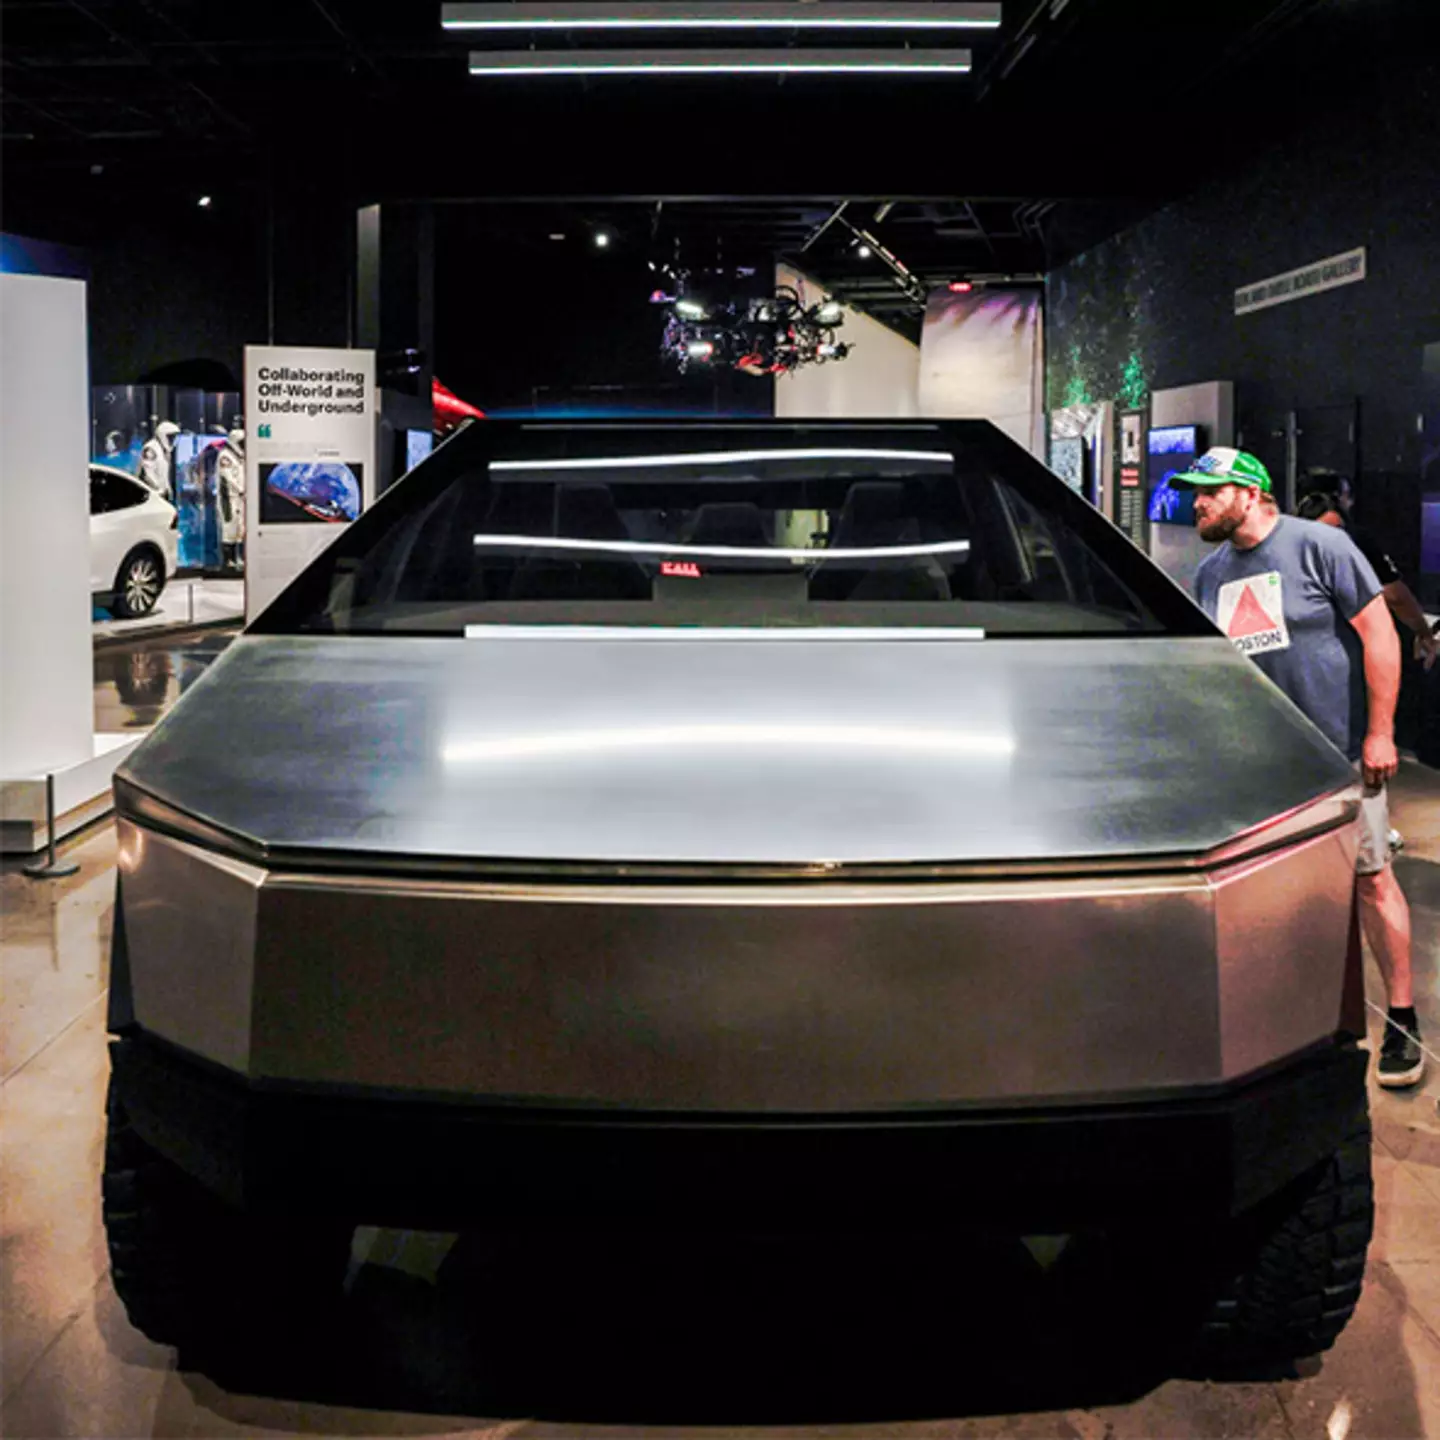 Man who went to view the Tesla Cybertruck in person says it's surprisingly different up close